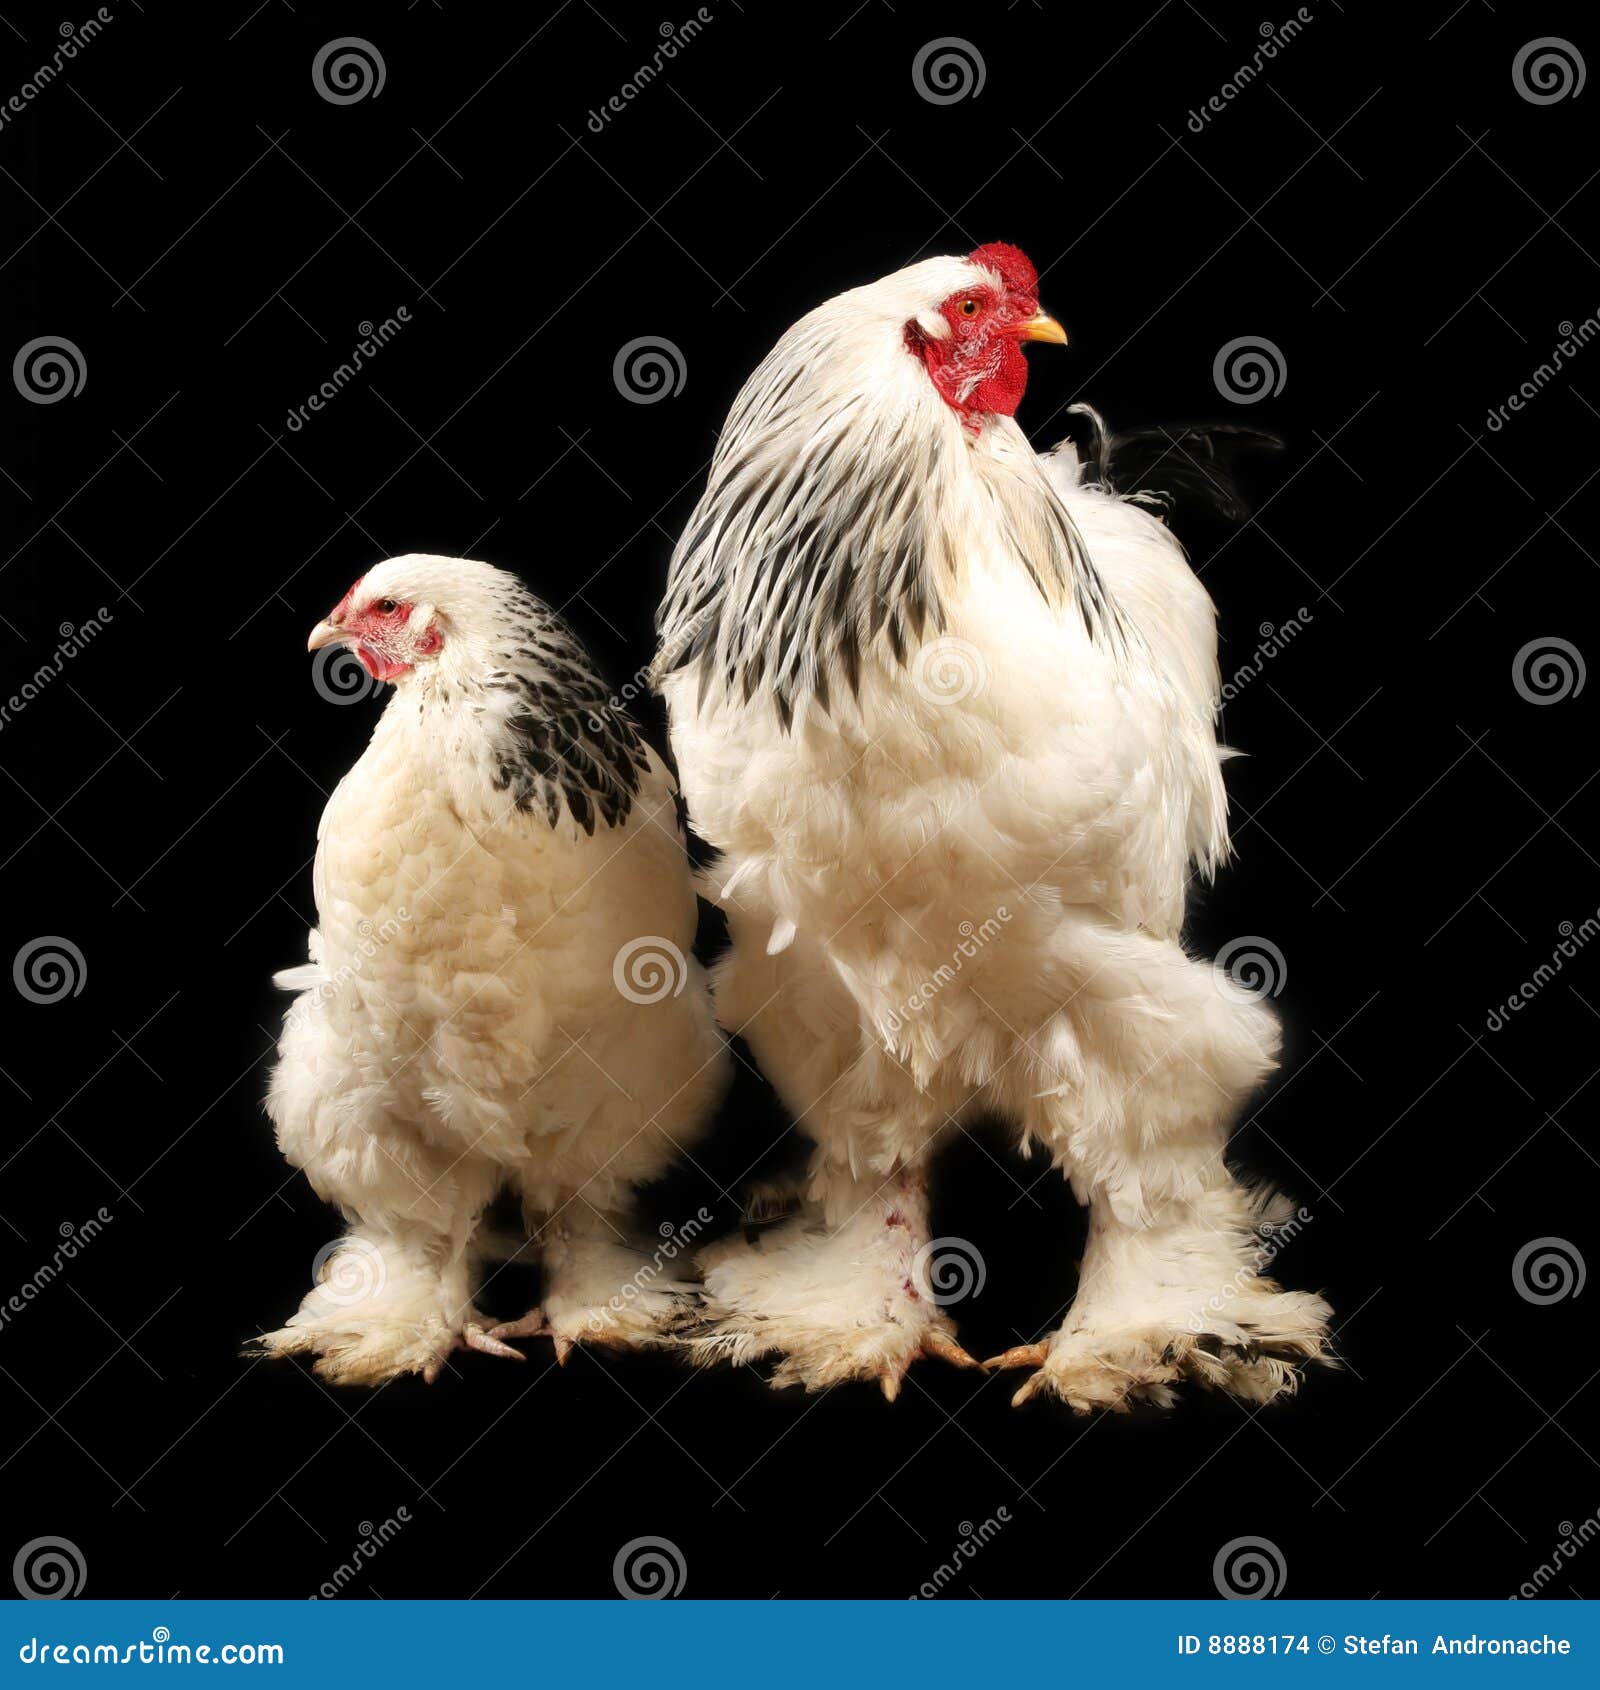 477 Brahma Rooster Hen Stock Photos - Free & Royalty-Free Stock